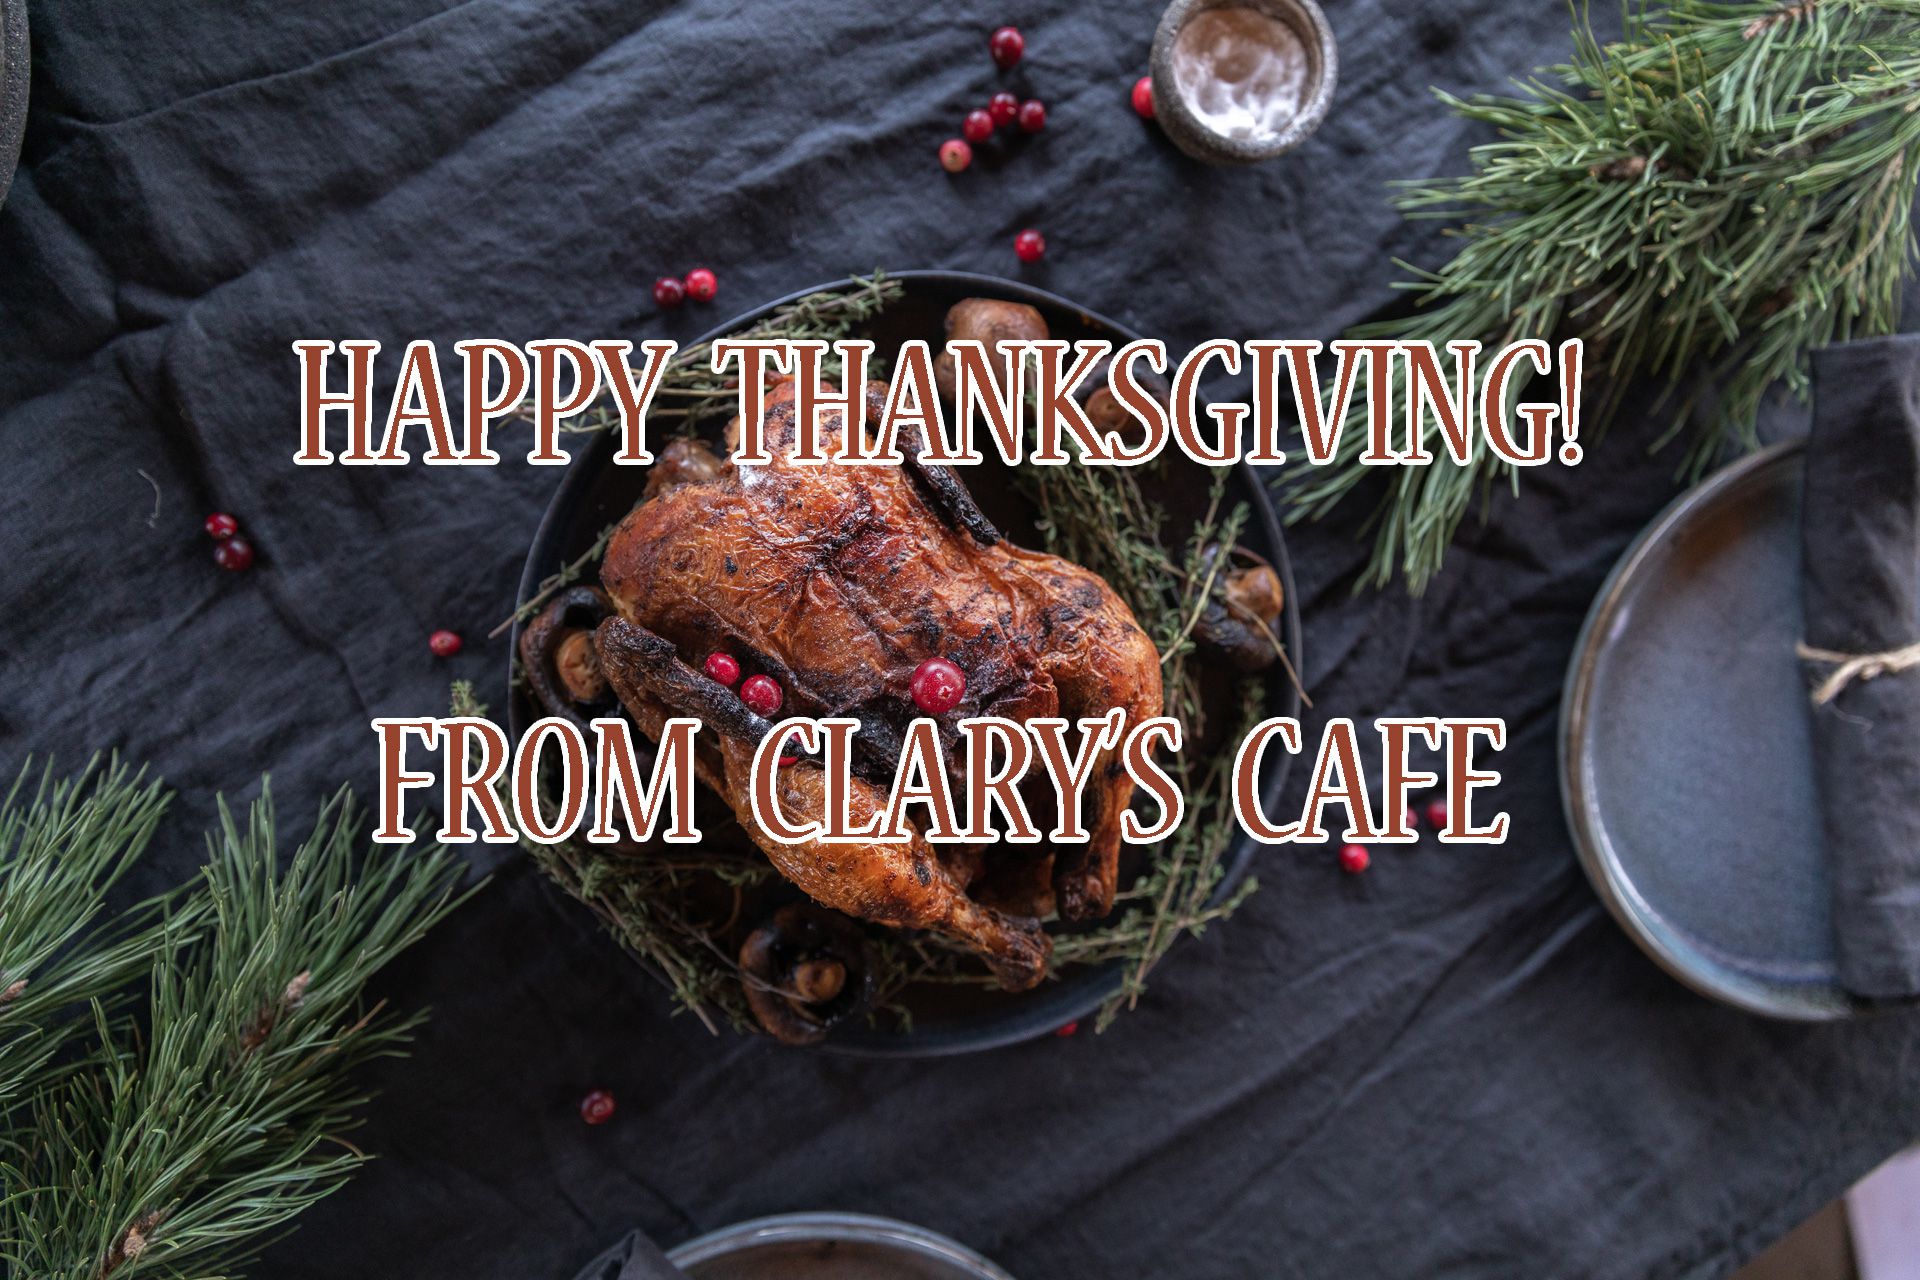 Happy Thanksgiving from Clary’s Cafe